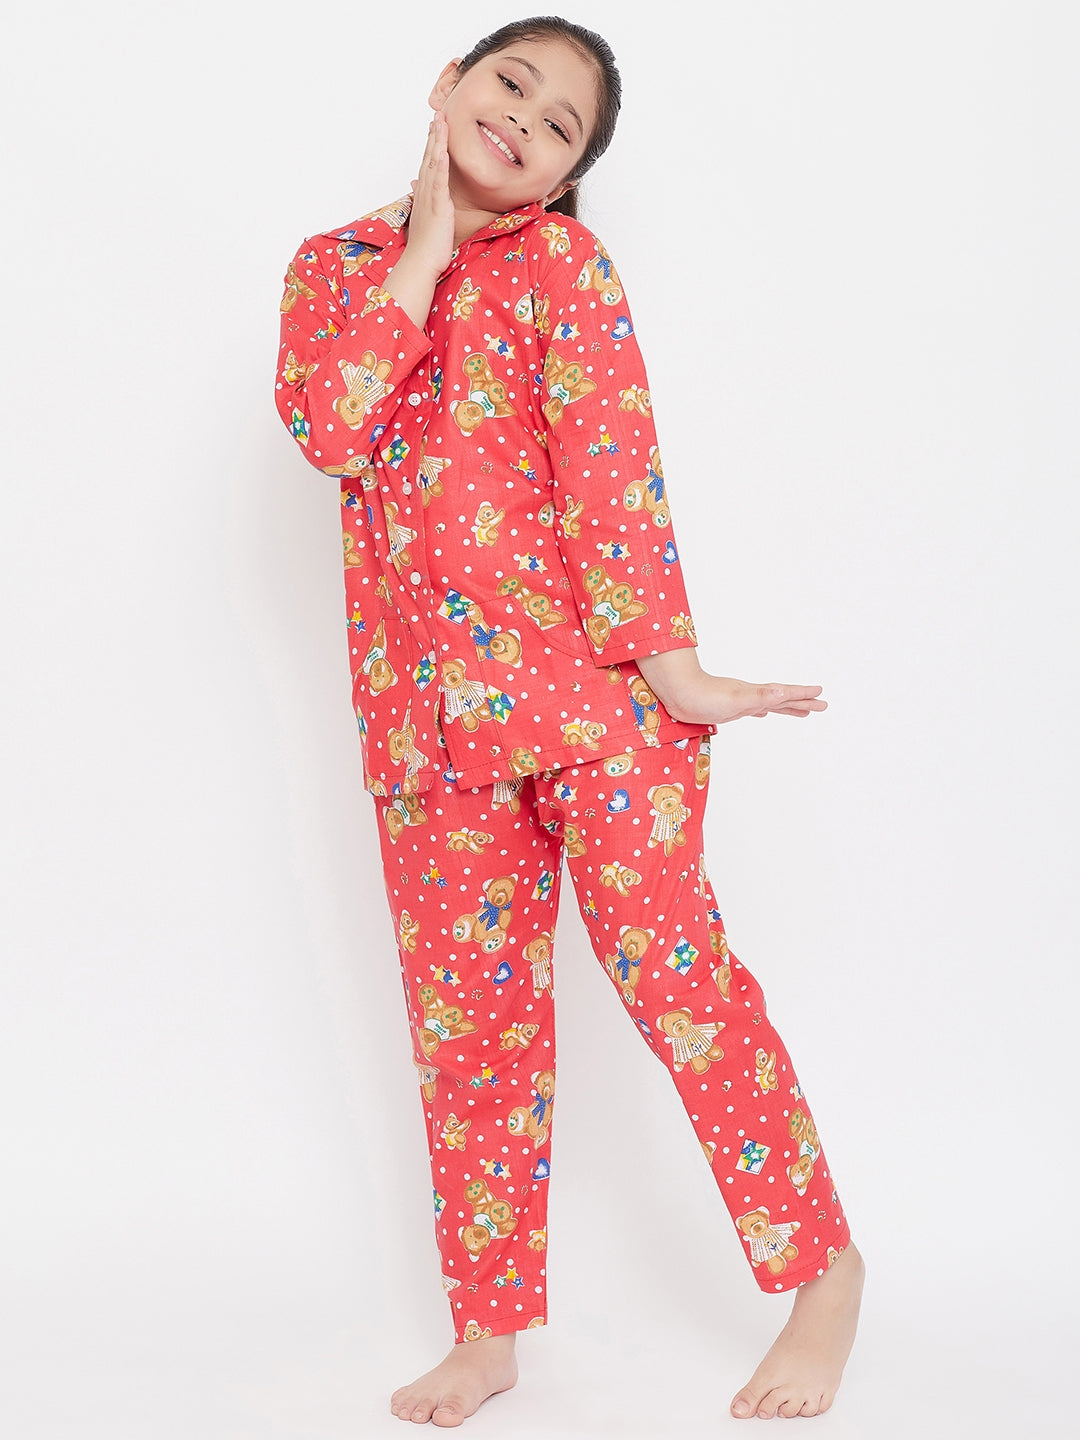 Girl's Peach & White Printed Rayon Nightsuit (Pack of 2) - NOZ2TOZ KIDS